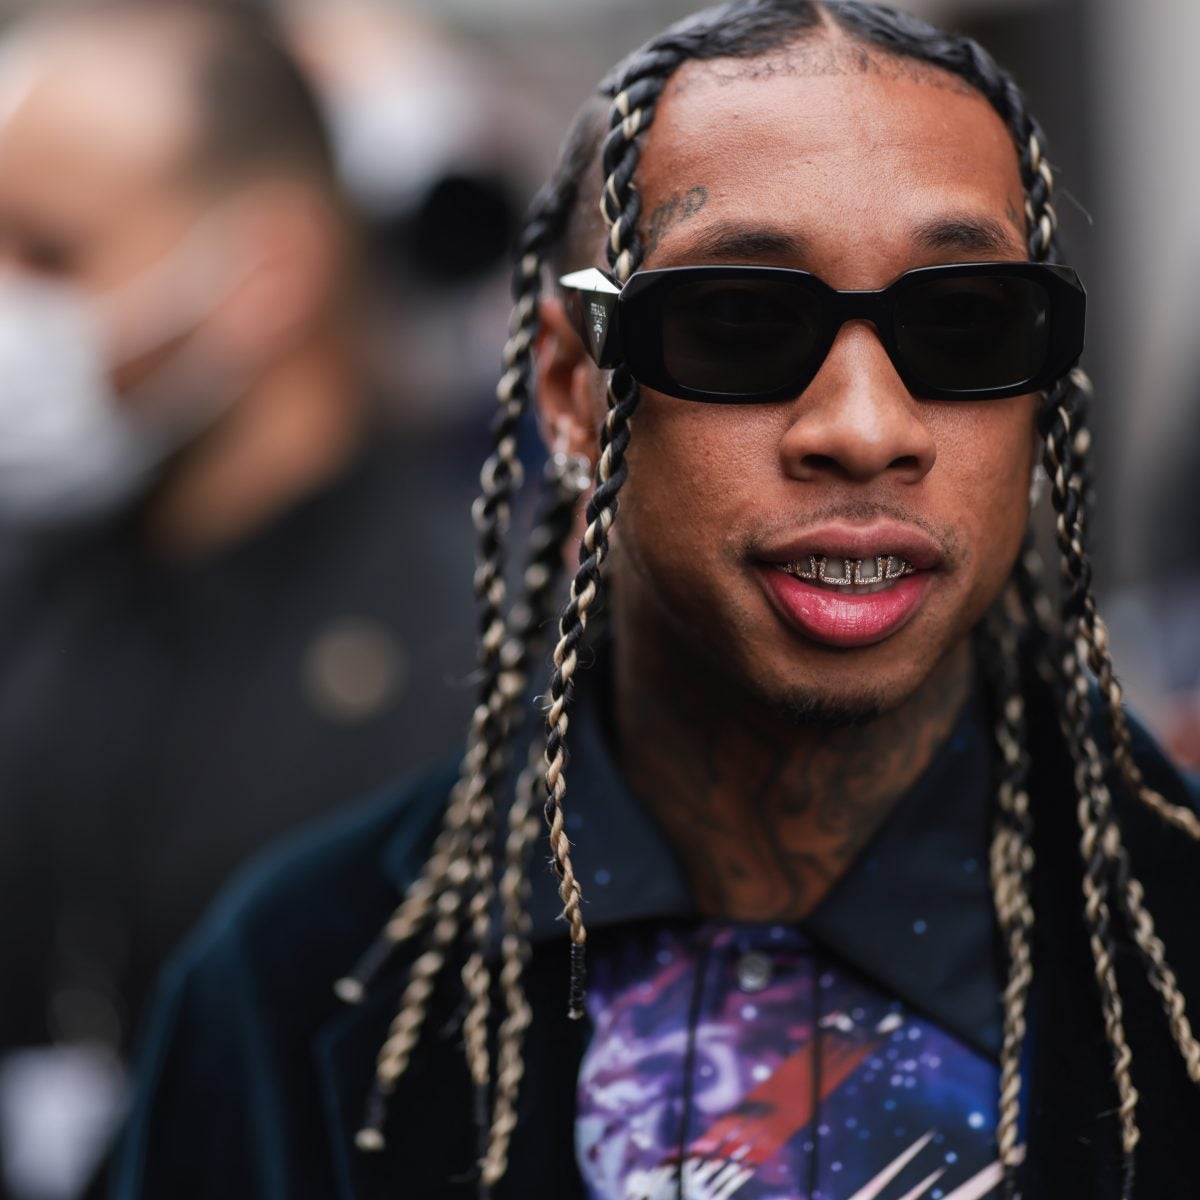 Tyga Arrested on Domestic Violence Charges, Turns Himself in to LAPD